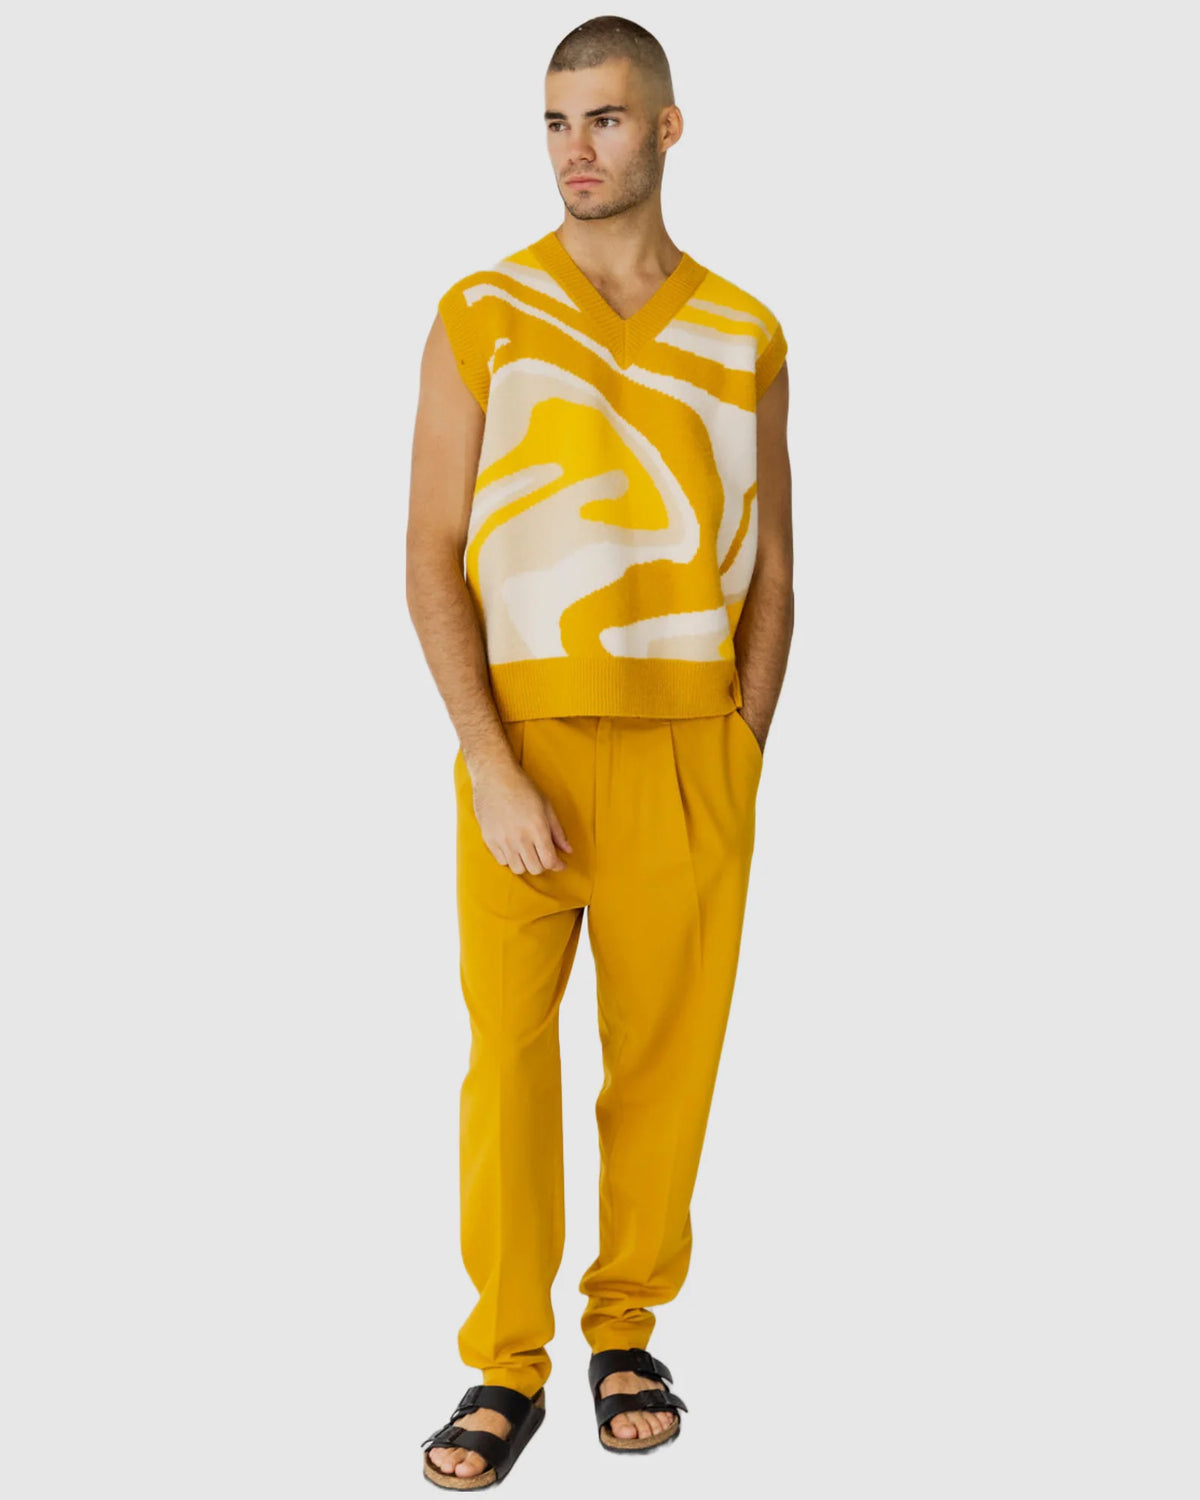 Justin Cassin Ignite Knit Vest in Yellow Color 2